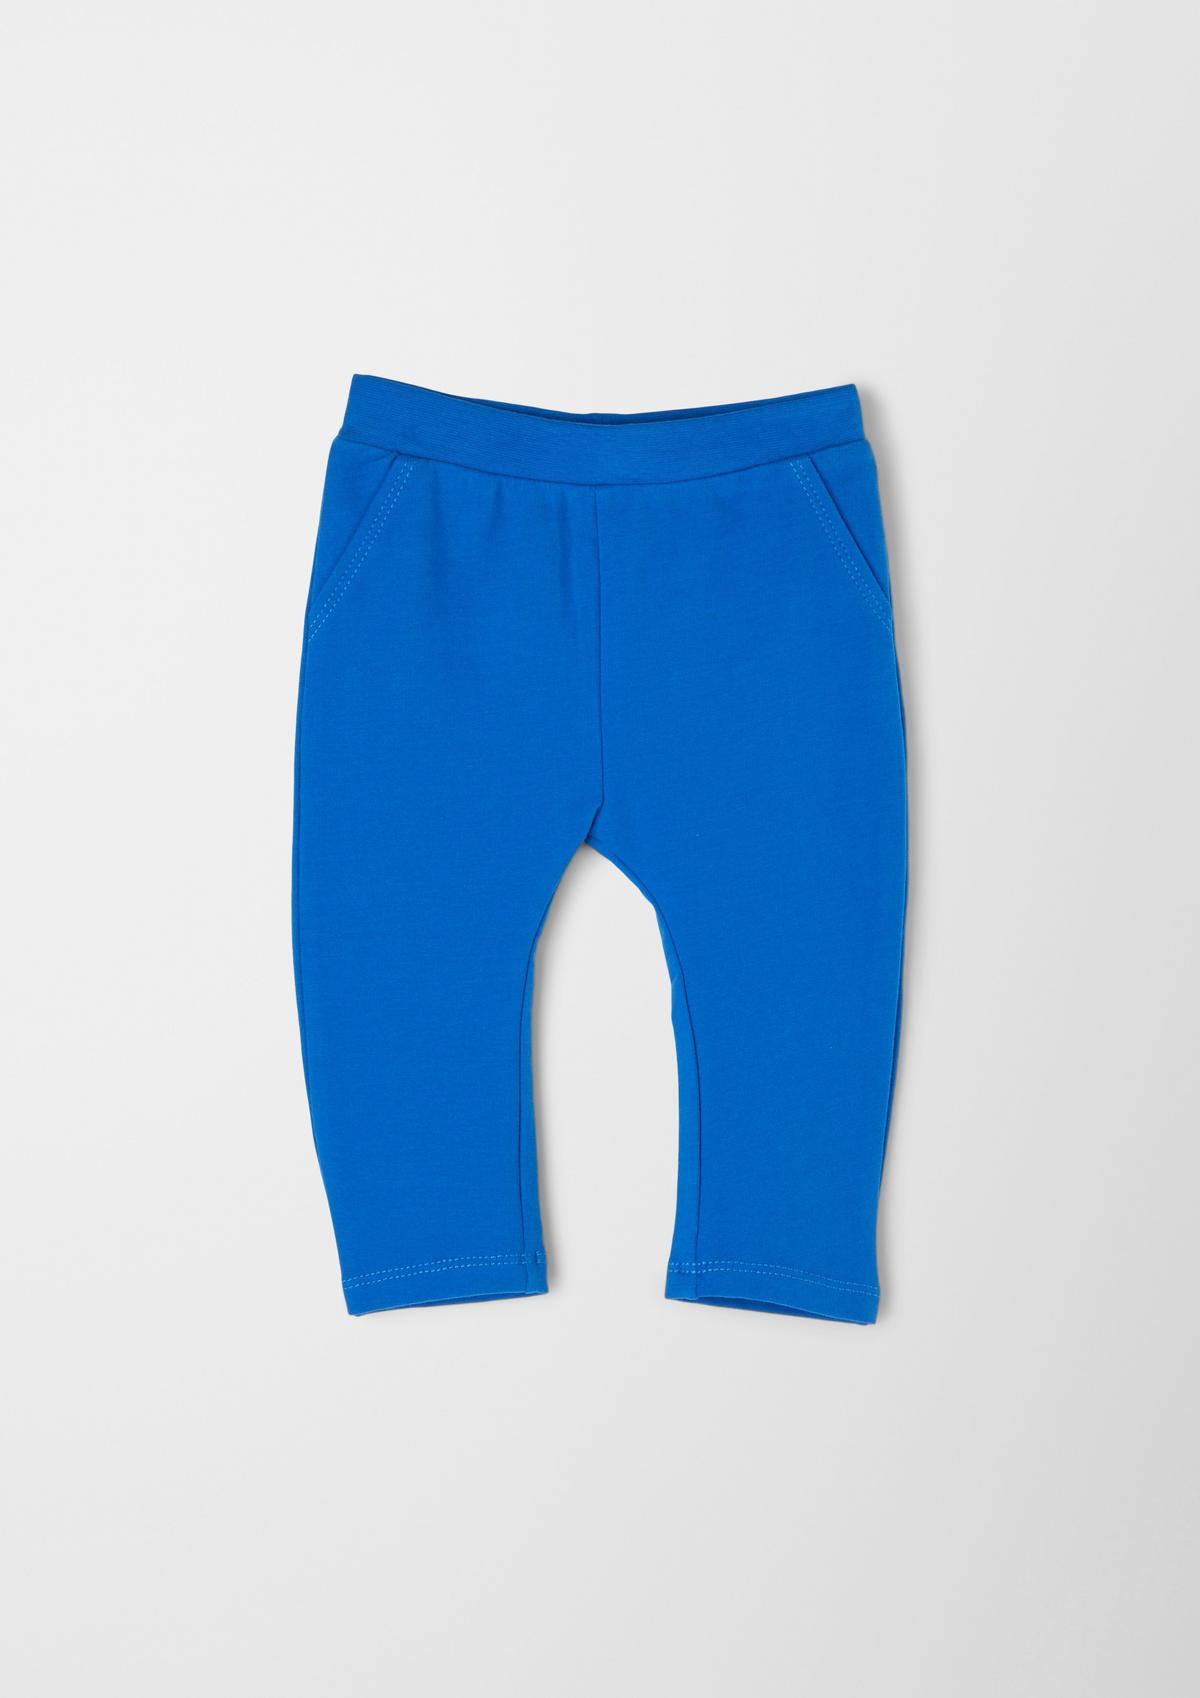 Leggings in blue with s fabric sweatshirt an royal | - elasticated waistband